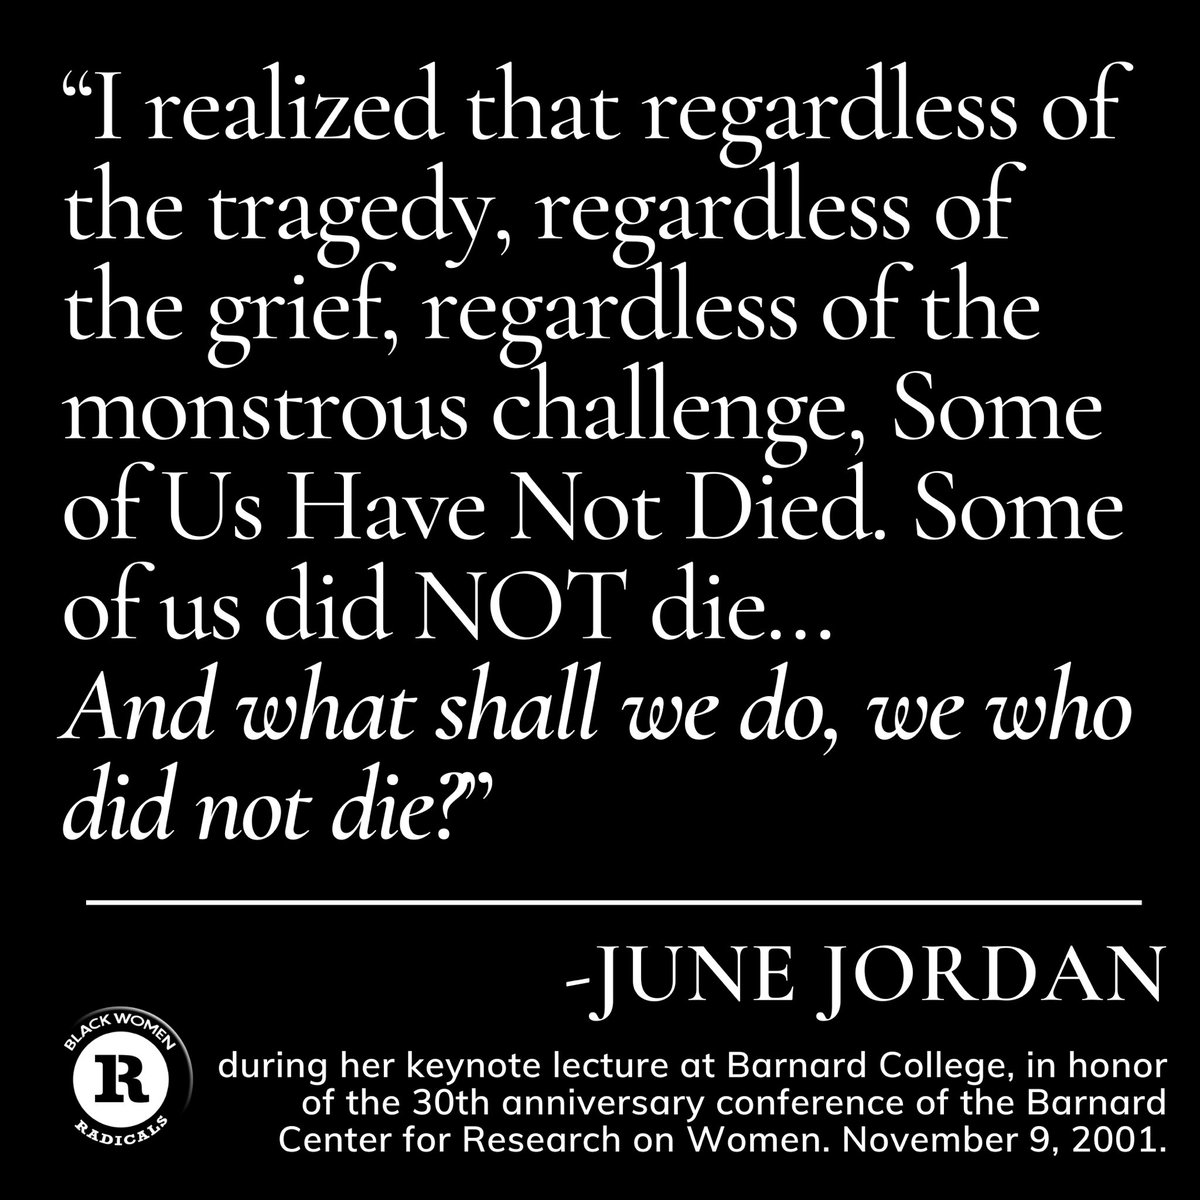 “I realized that regardless of the tragedy, regardless of the grief, regardless of the monstrous challenge, Some of Us Have Not Died. Some of us did NOT die…And what shall we do, we who did not die?” — June Jordan’s keynote lecture at Barnard College. November 9, 2001.